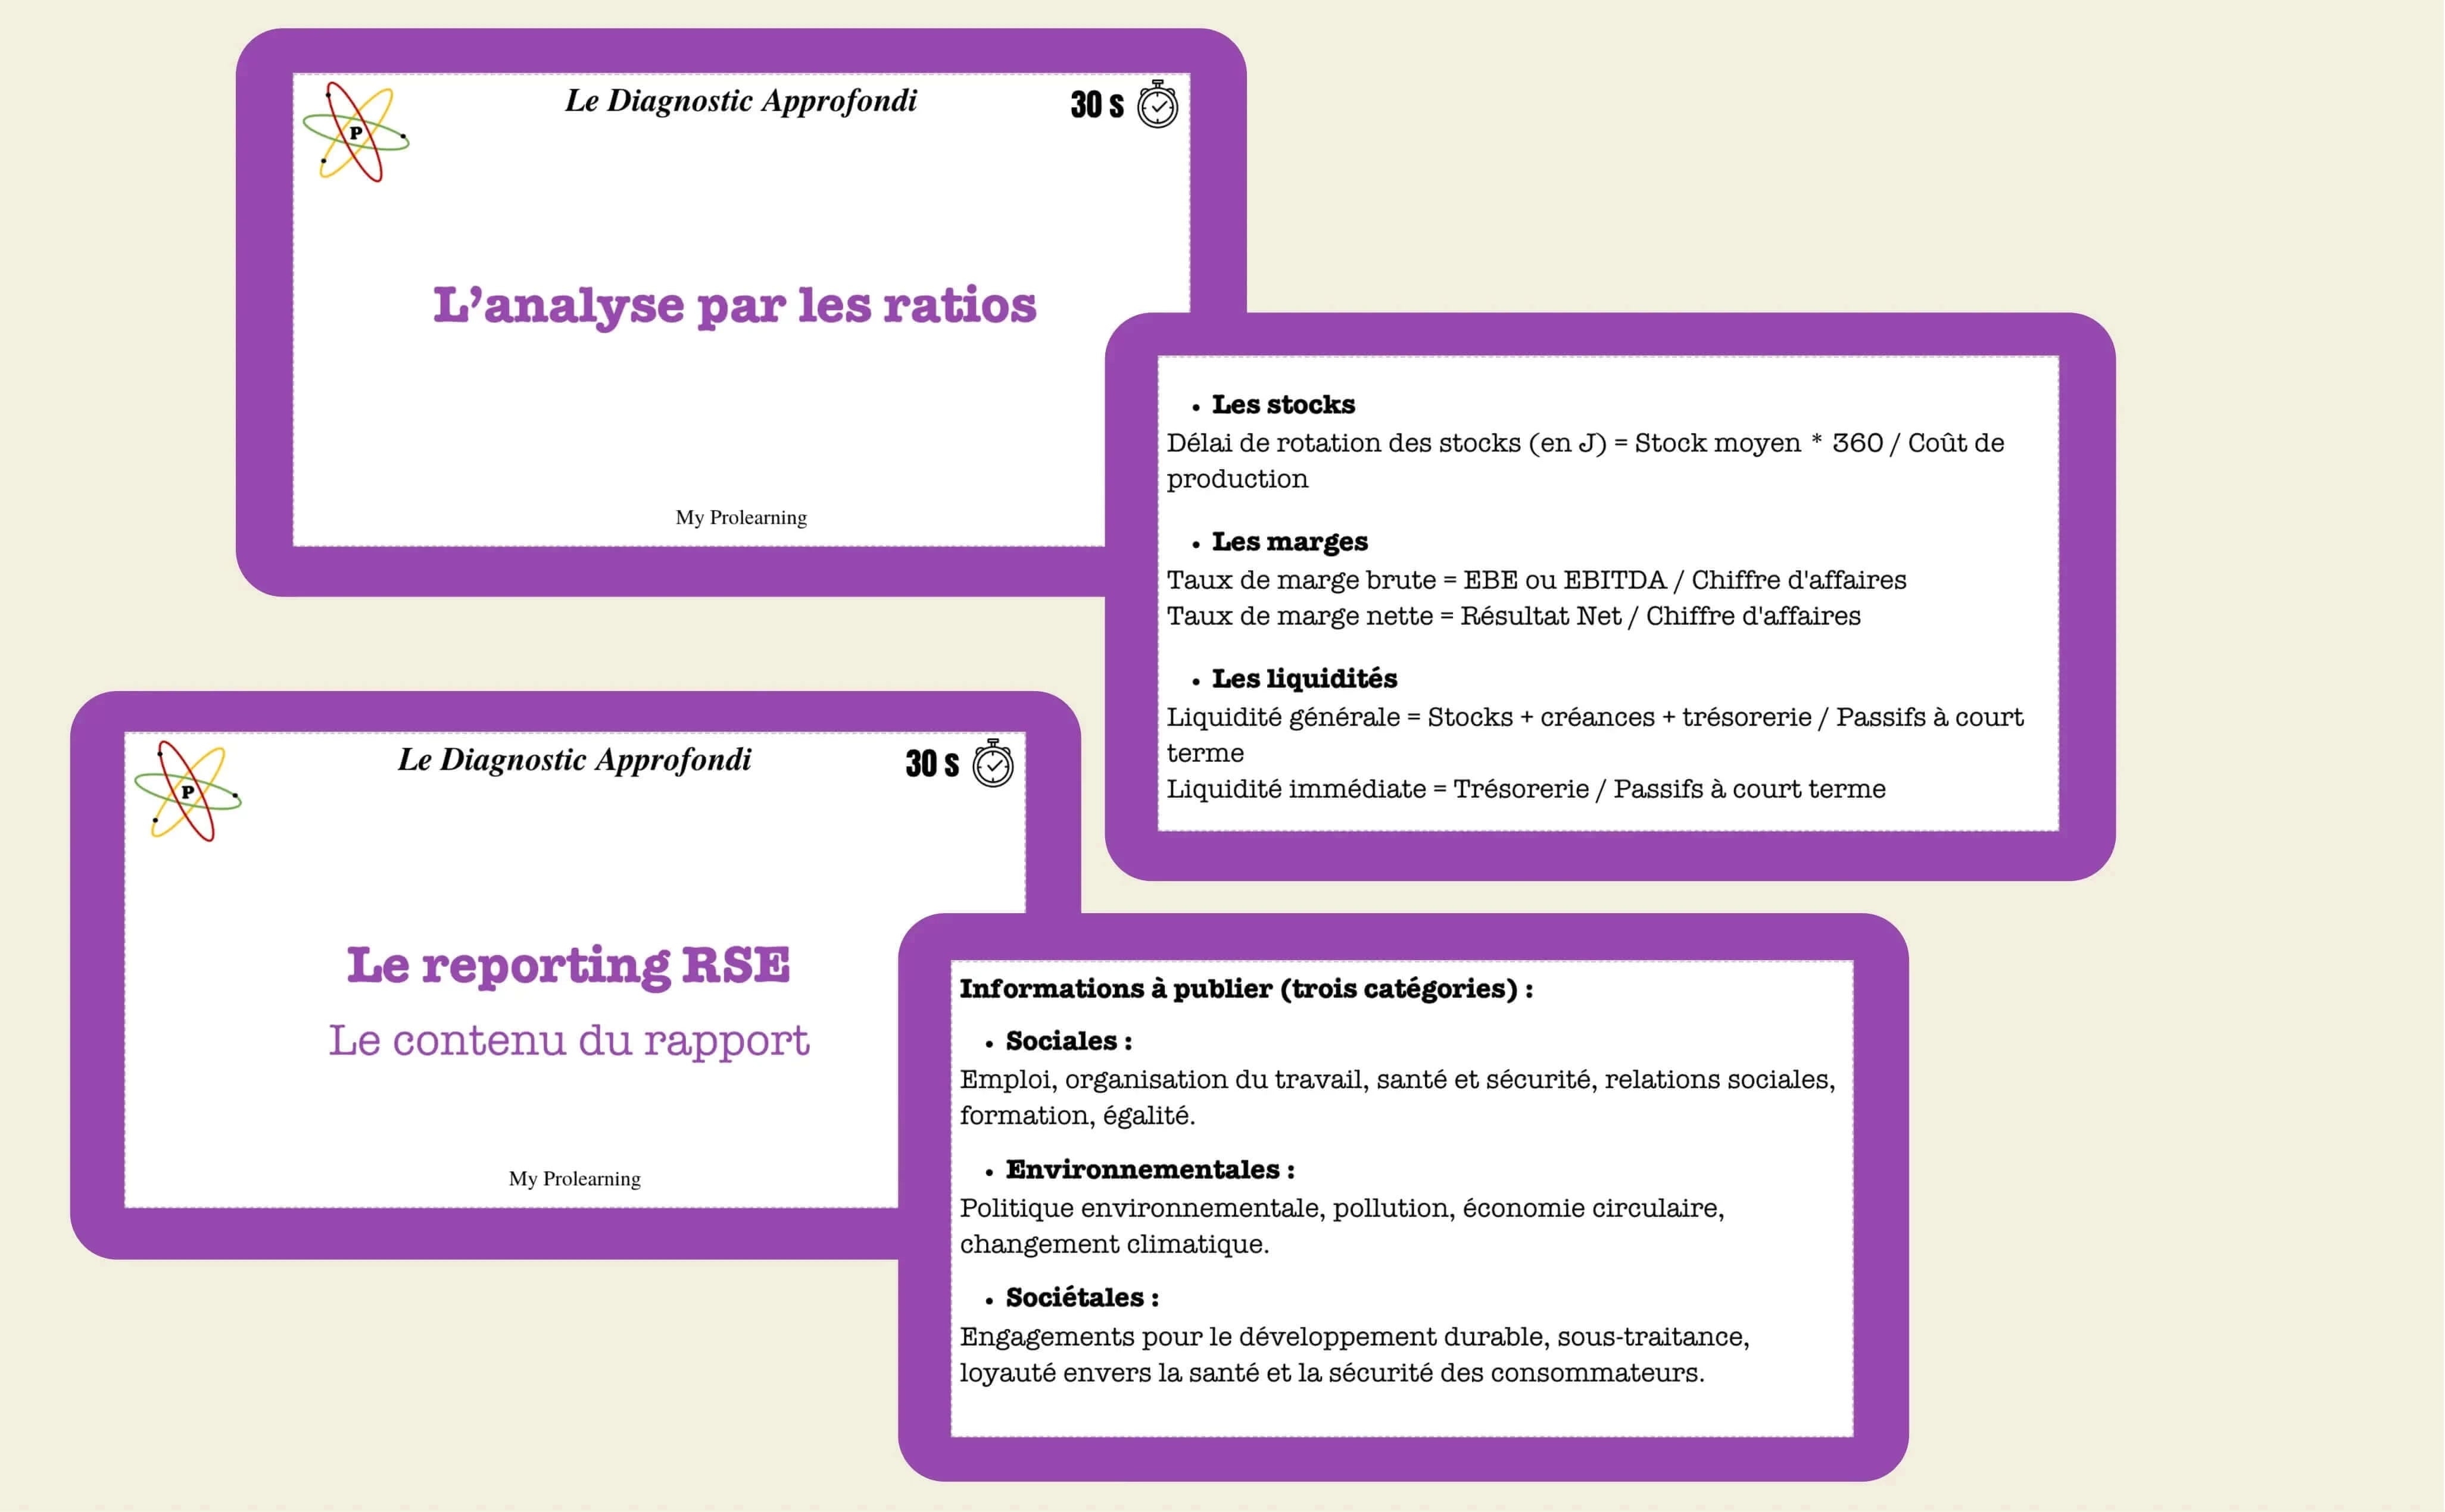 FICHES DIAGNOSTIC APPROFONDI - My Prolearning 